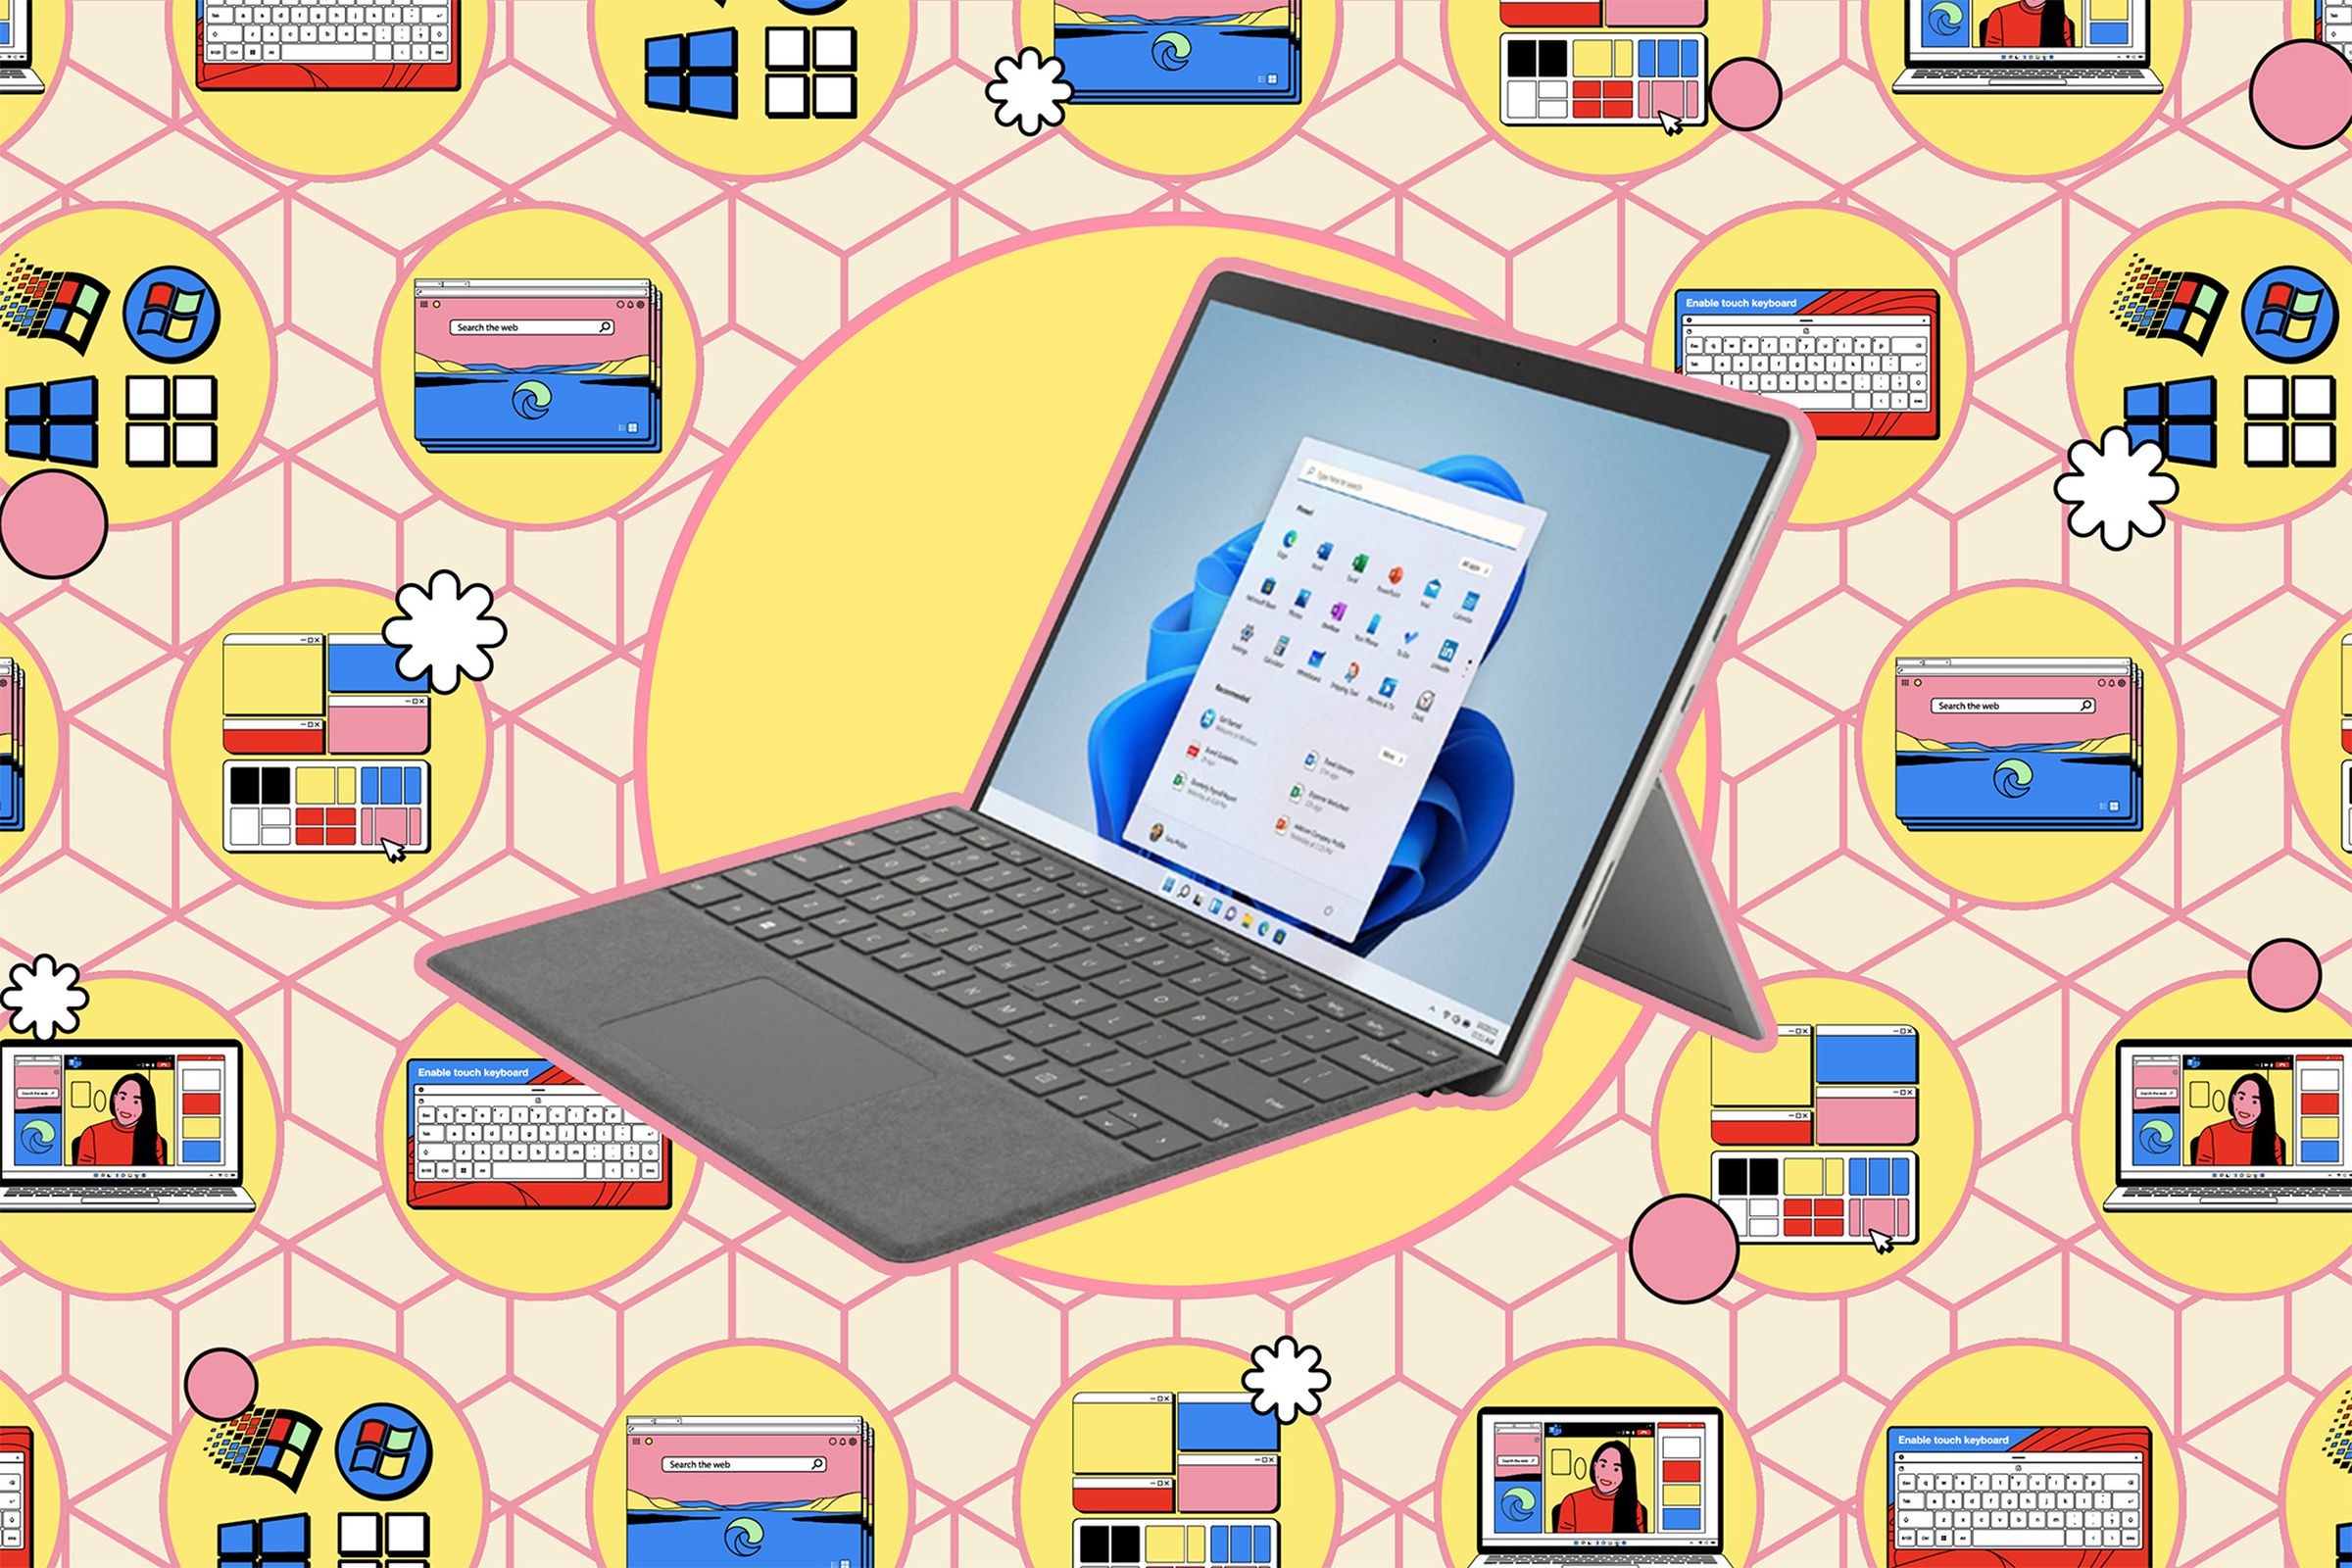 Windows laptop against yellow background with small illustrations